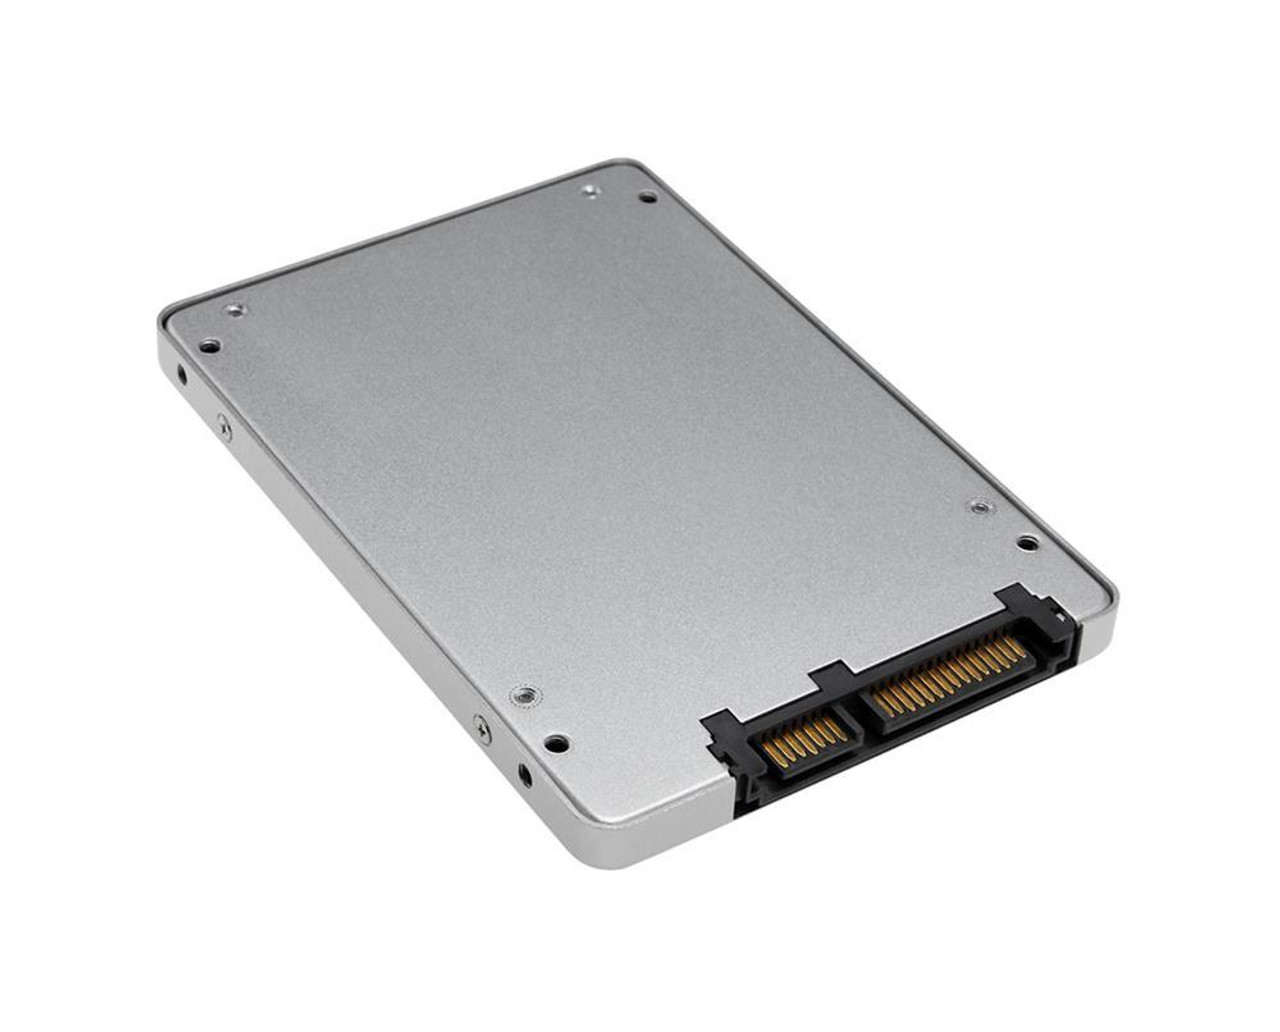 03B01-00023500 Asus 256GB SATA 6Gbps 2.5-inch Internal Solid State Drive (SSD)